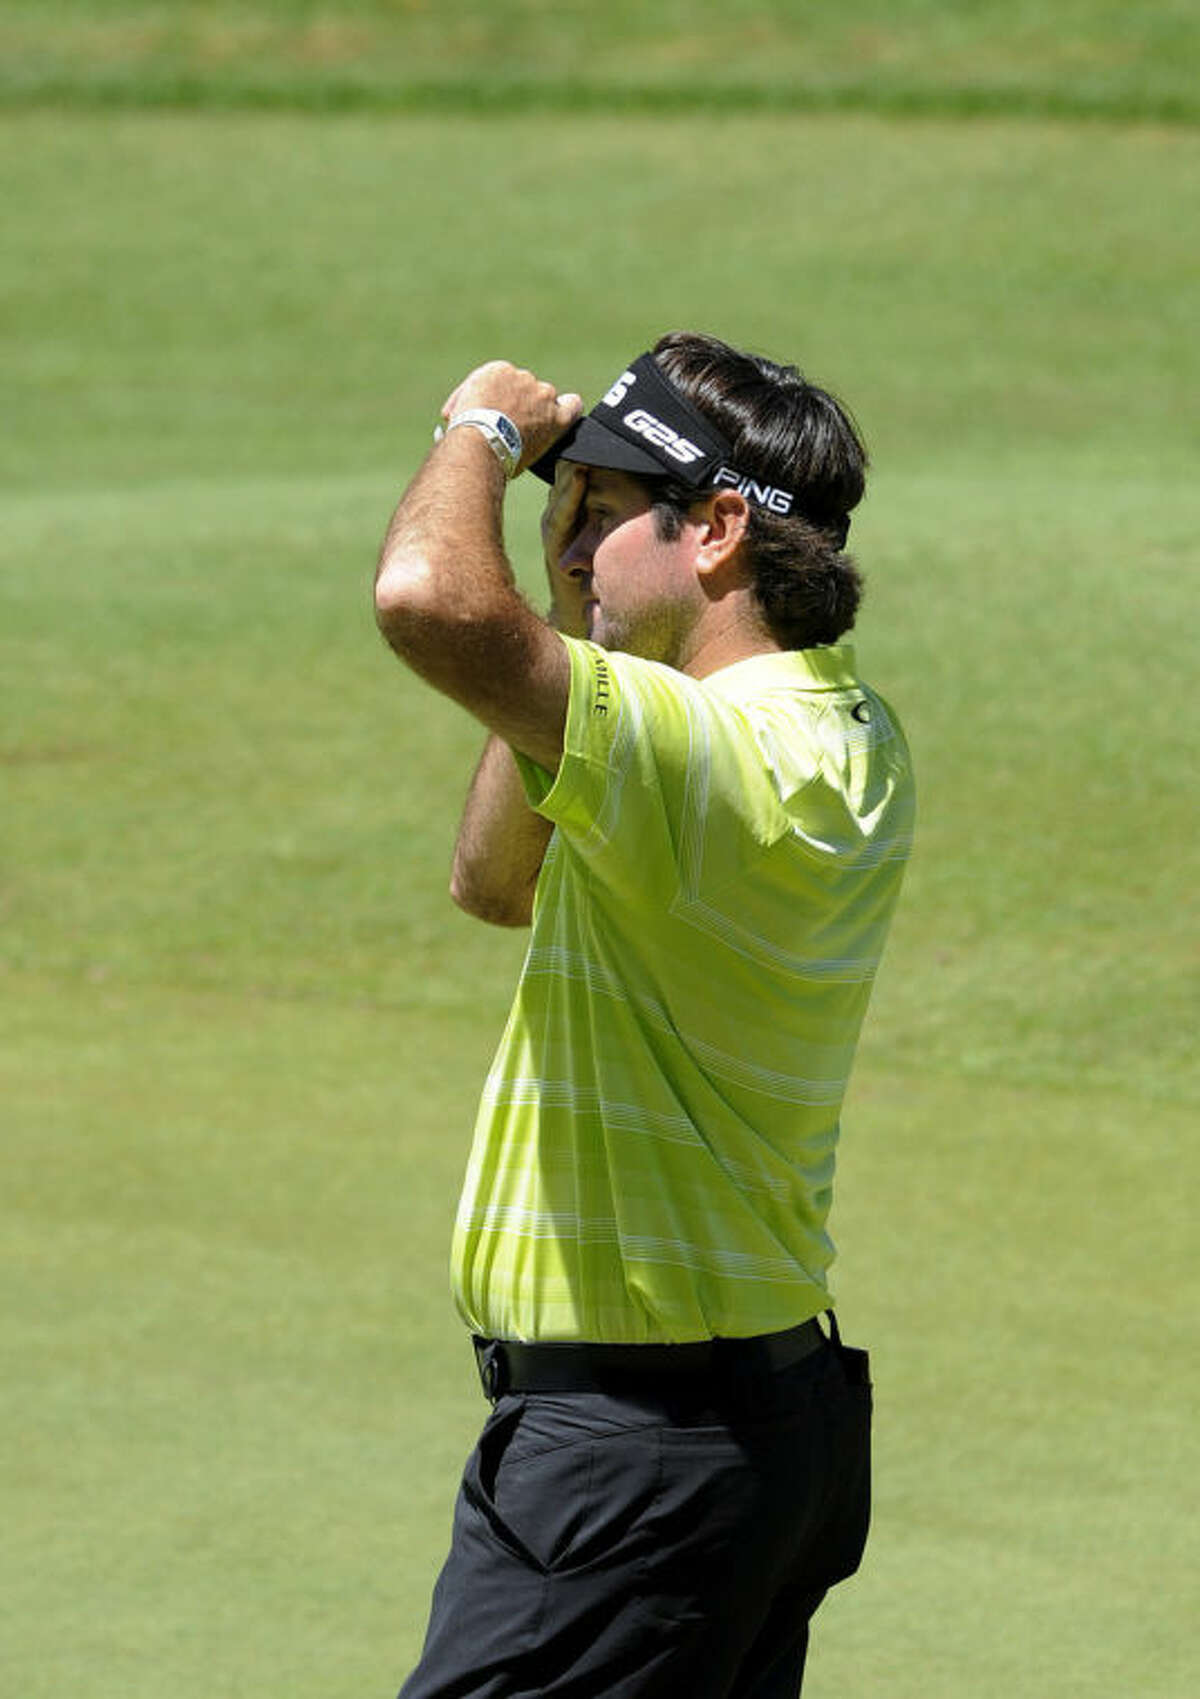 Bubba Watson reacts after finishing the third round of the Travelers Championship golf tournament in Cromwell, Conn., Saturday, June 21, 2014. (AP Photo/Fred Beckham)